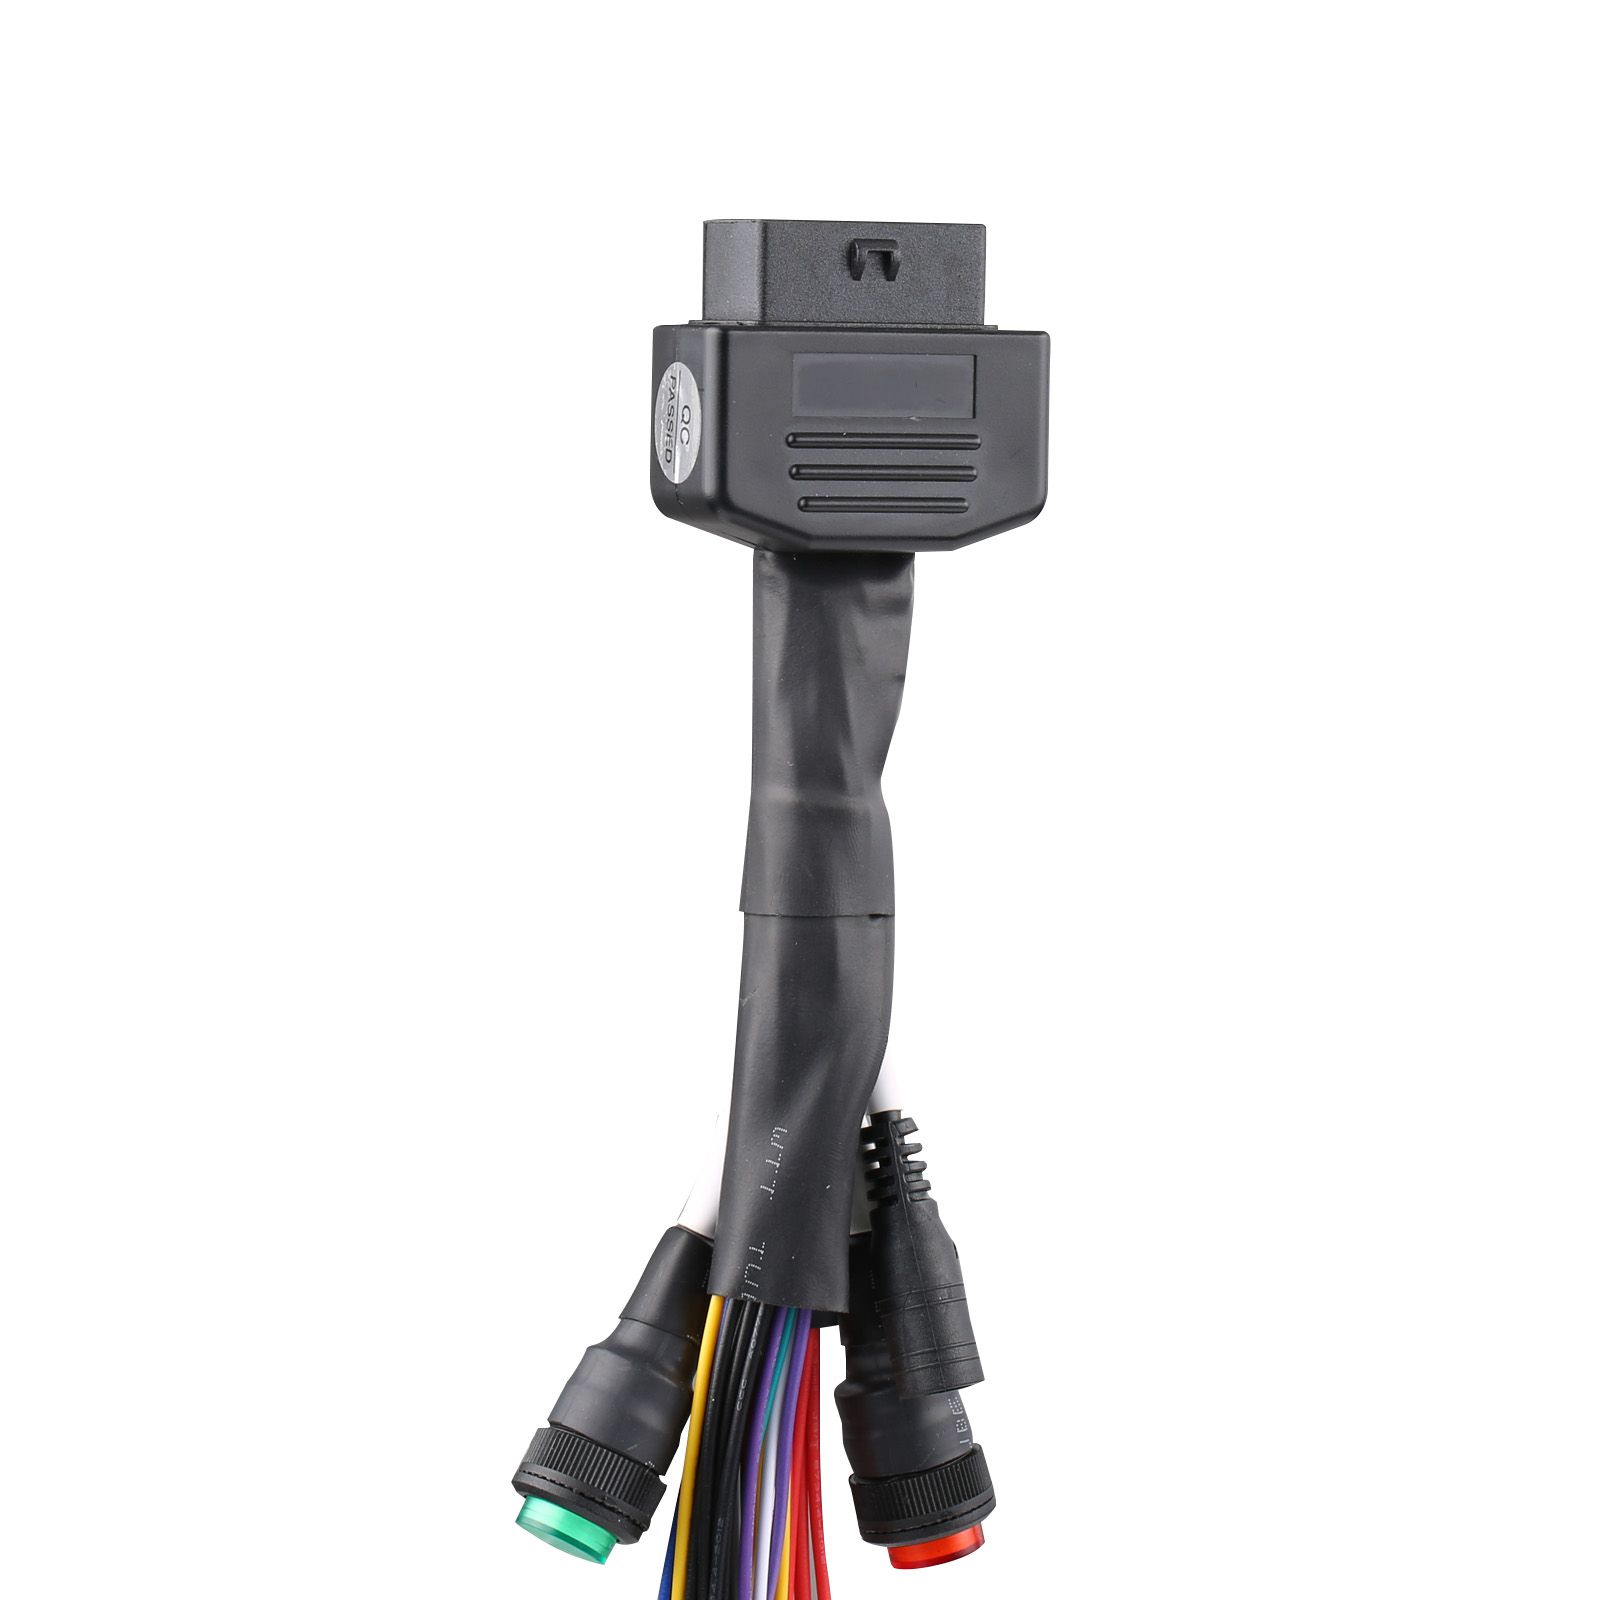 GODIAG OBD2 Jumper Cable for MPPS Kess V2 Fgtech Bench Work Used to Connect  ECU for ECU Programing